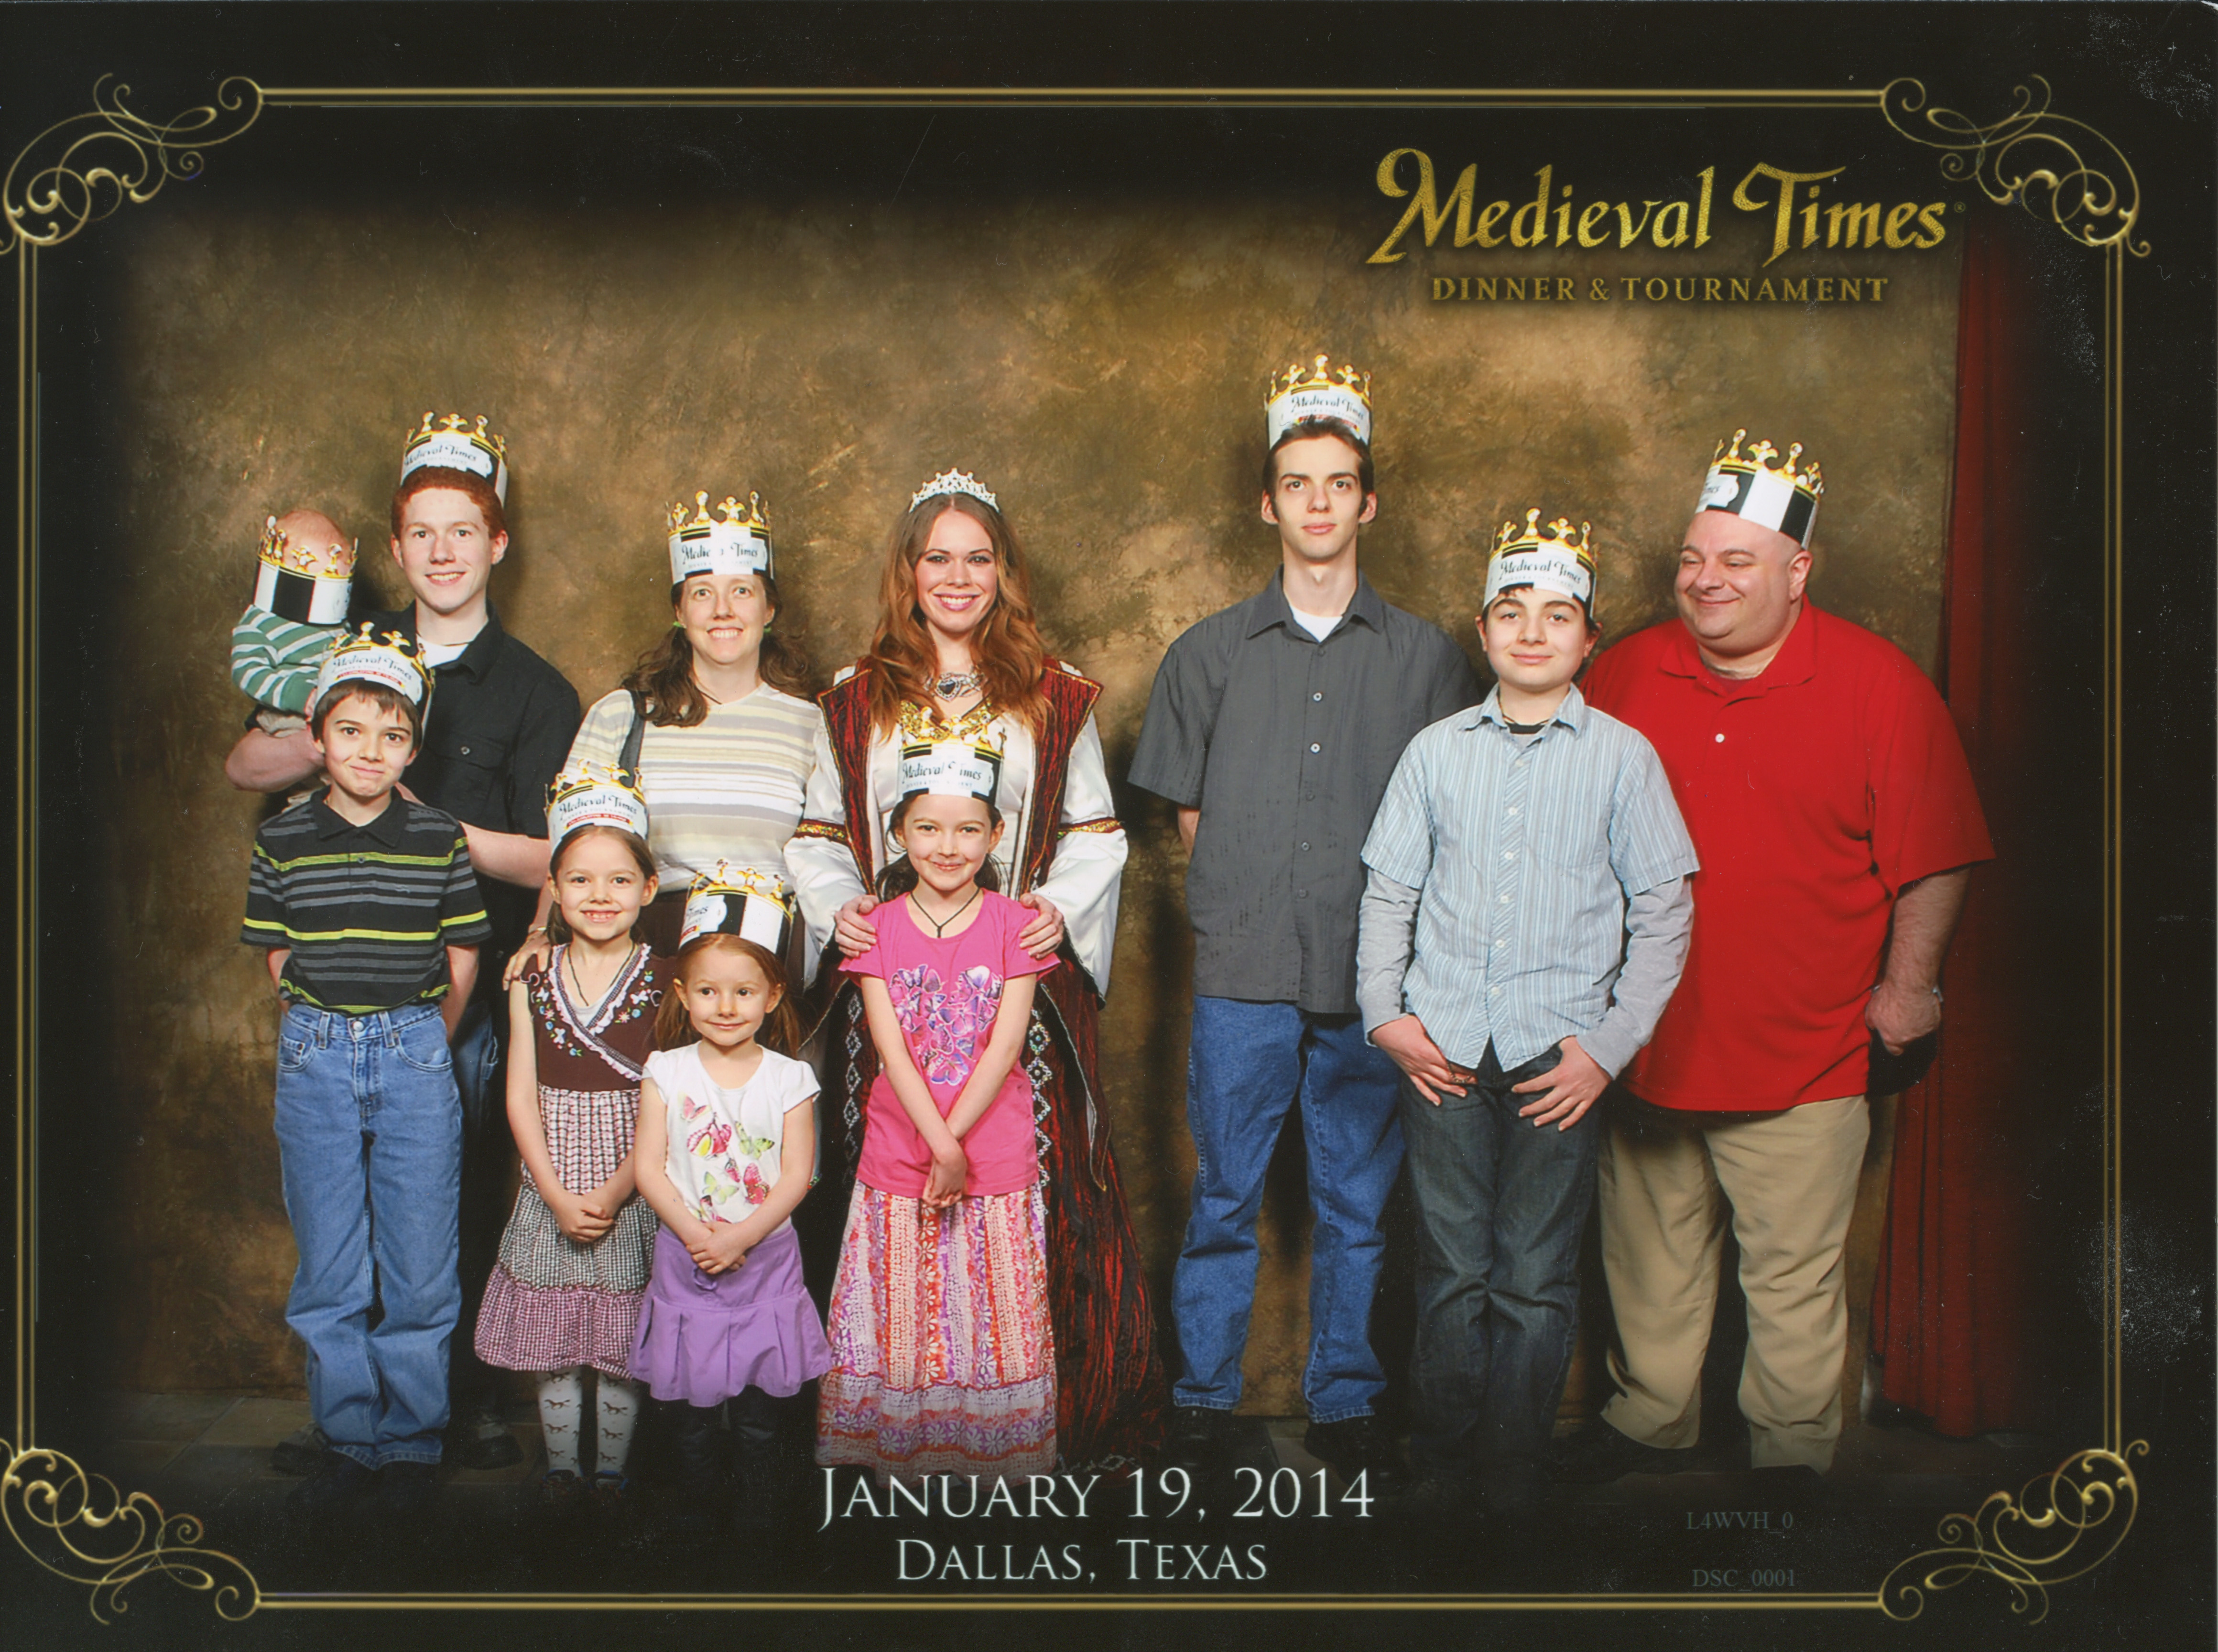 Medieval Times Stone Wall Background. Michael holding Becket who has his mock paper crown which is too big for him fall down and block his vision like a paper blindfold. It's hilarious. Cross, Bernie, Jen, Catie, The Princess, Jacinta, Joseph Nunzio and Justin. Bottom Text: 'Dallas, Texas January 19, 2014'